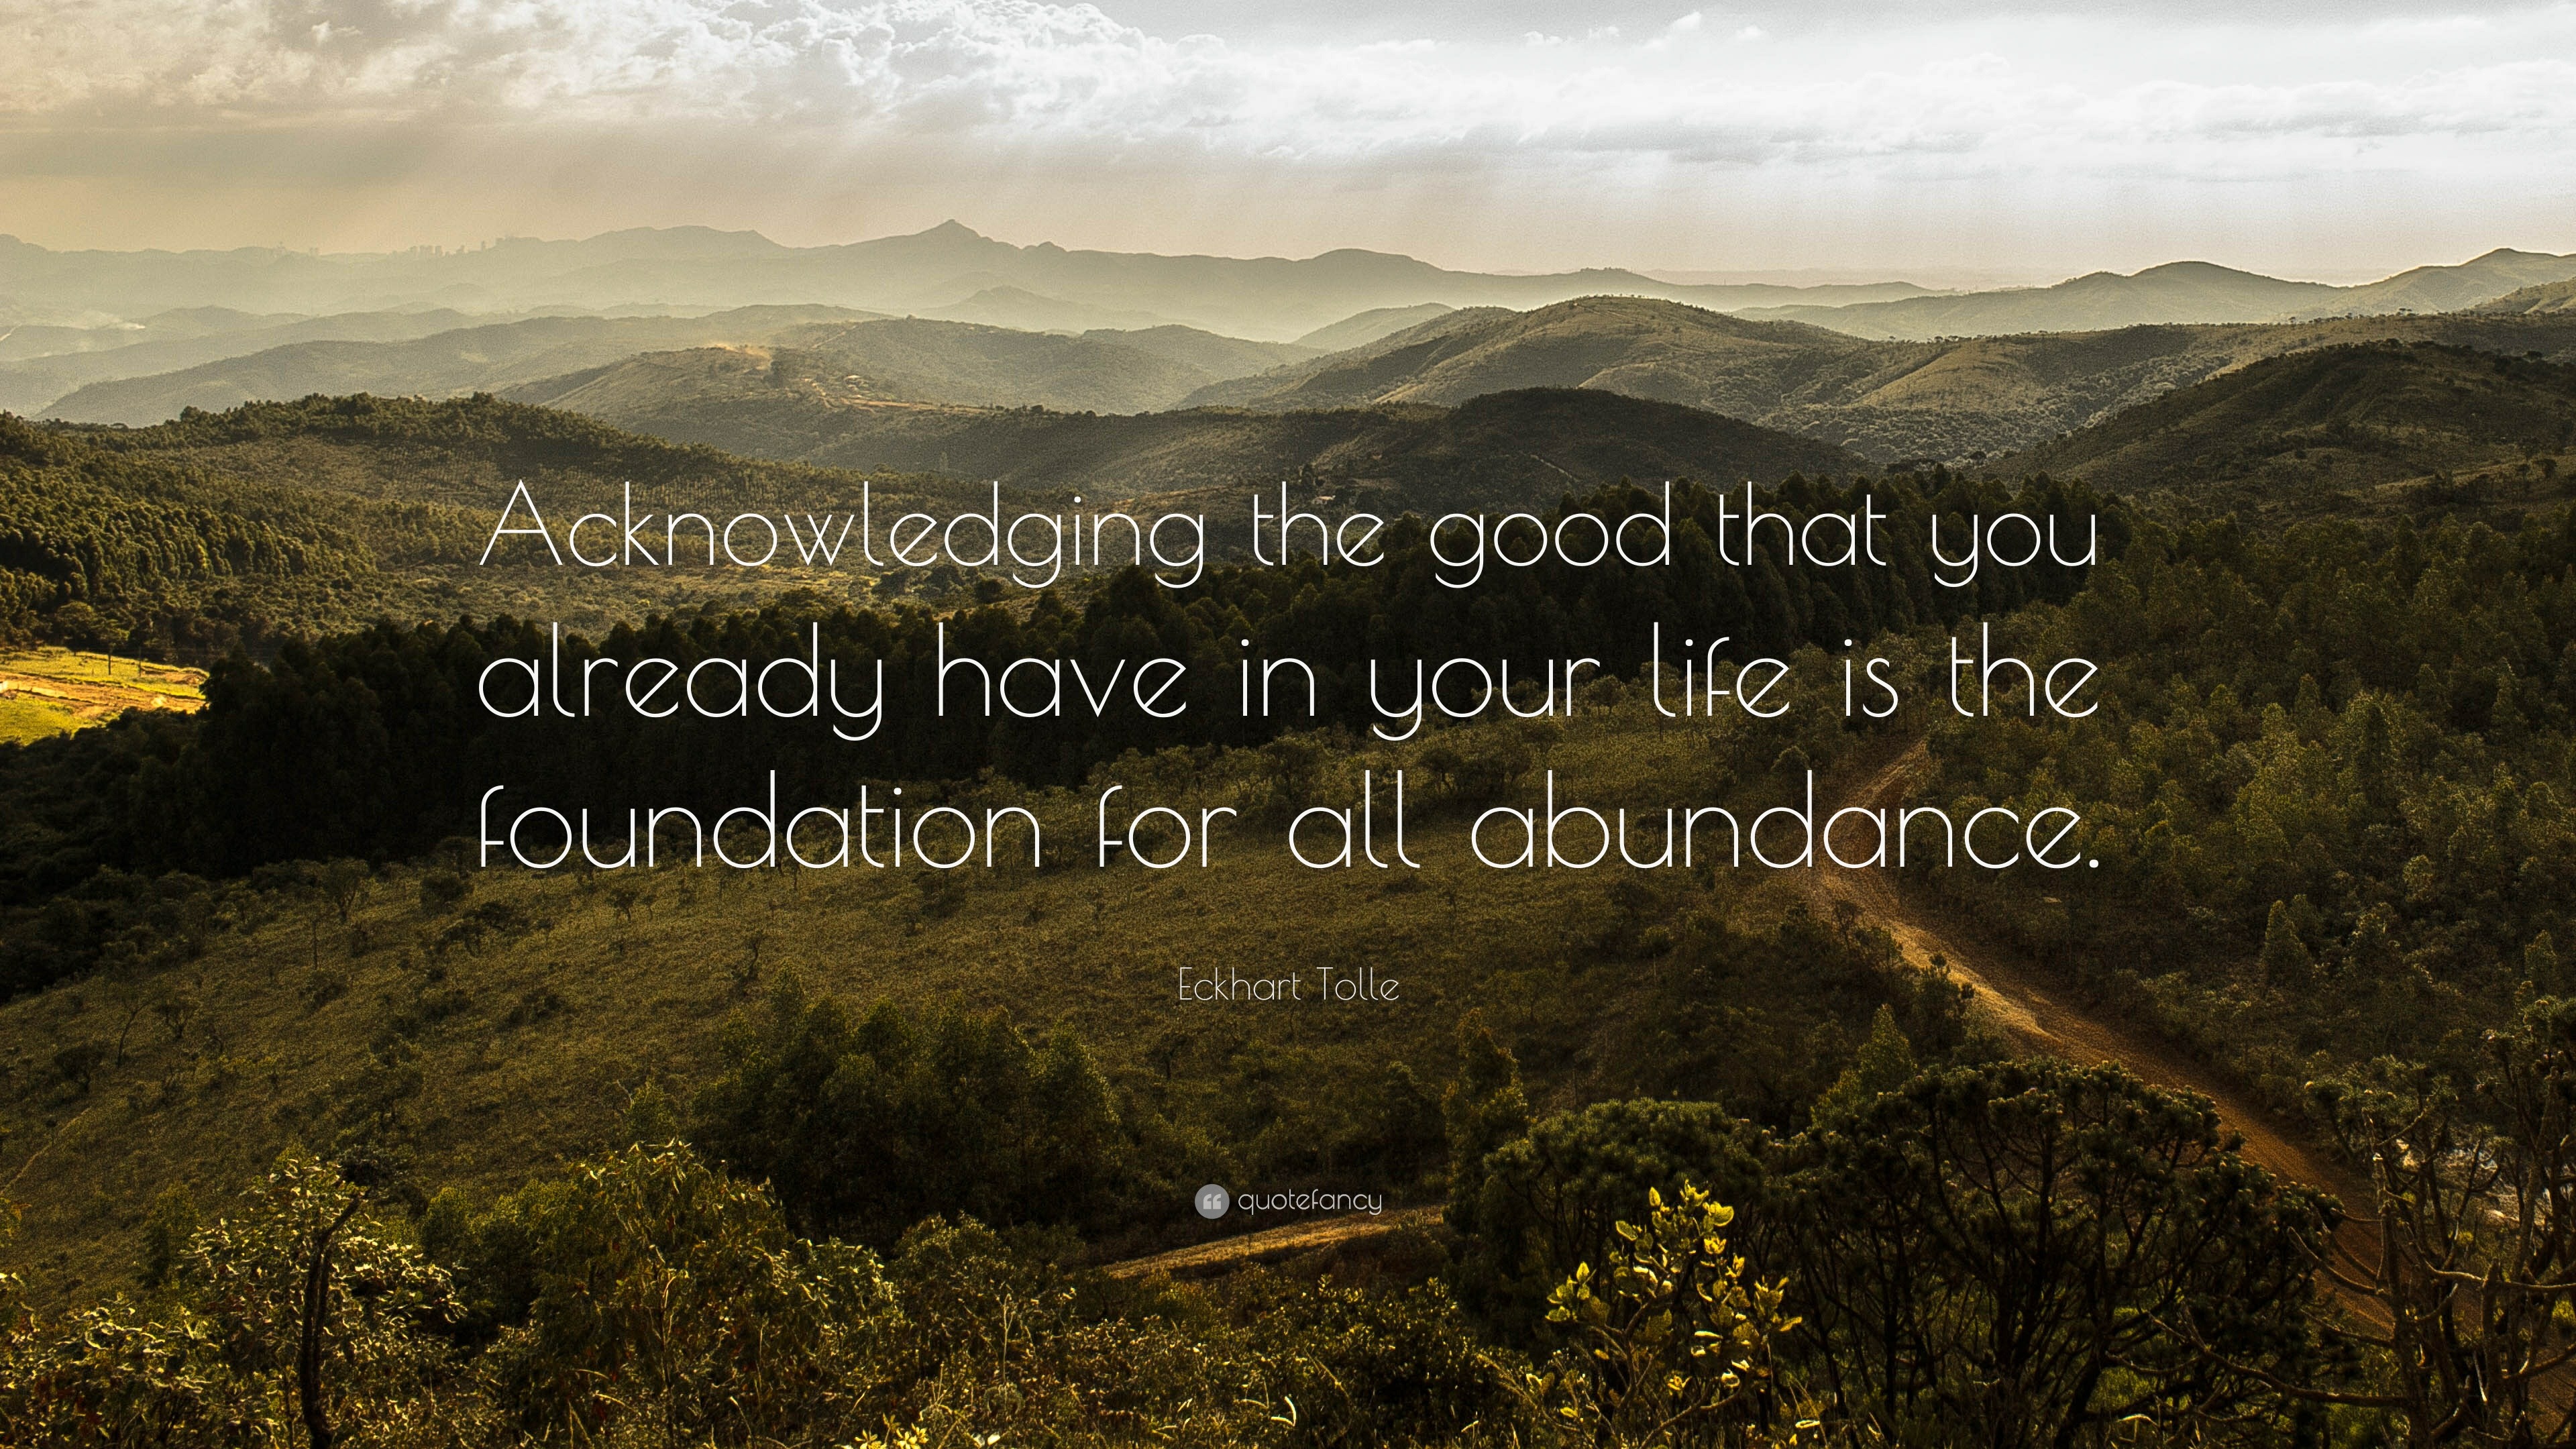 Eckhart Tolle Quotes (28 wallpapers) - Quotefancy